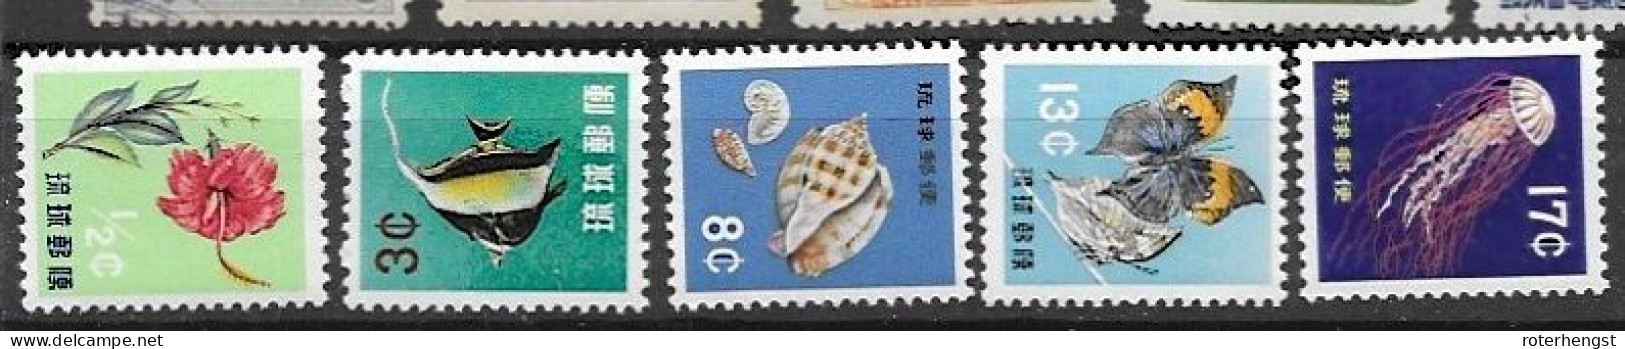 Ryu Kyu Mnh ** 42 Euros Good Set Jelly Fish Butterfly Shell Flower  1959 - Asia (Other)